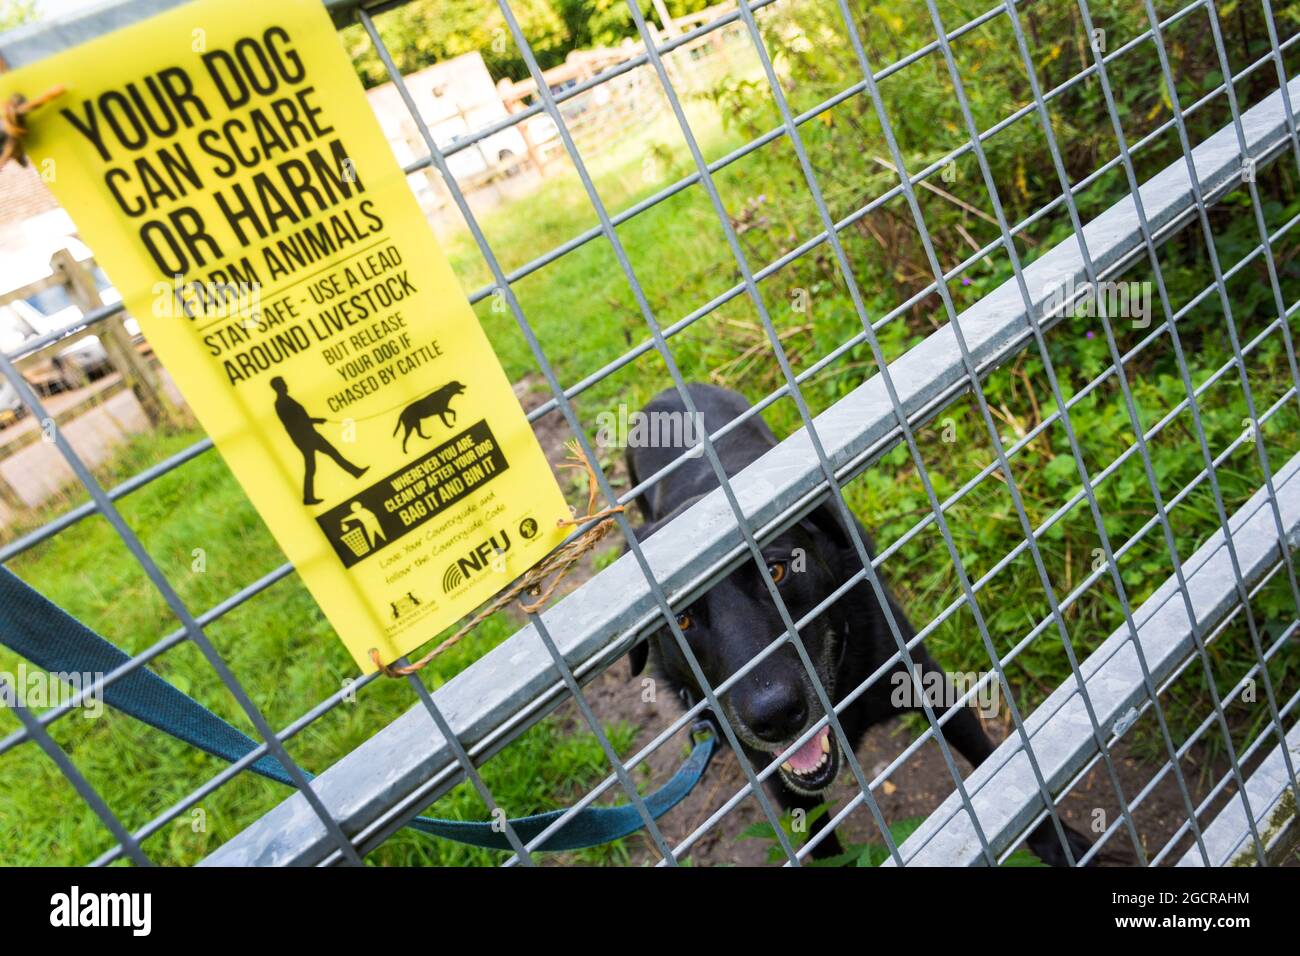 Your dog can scare or harm farm animals, NFU sign warns of harm to livestock on farms Stock Photo